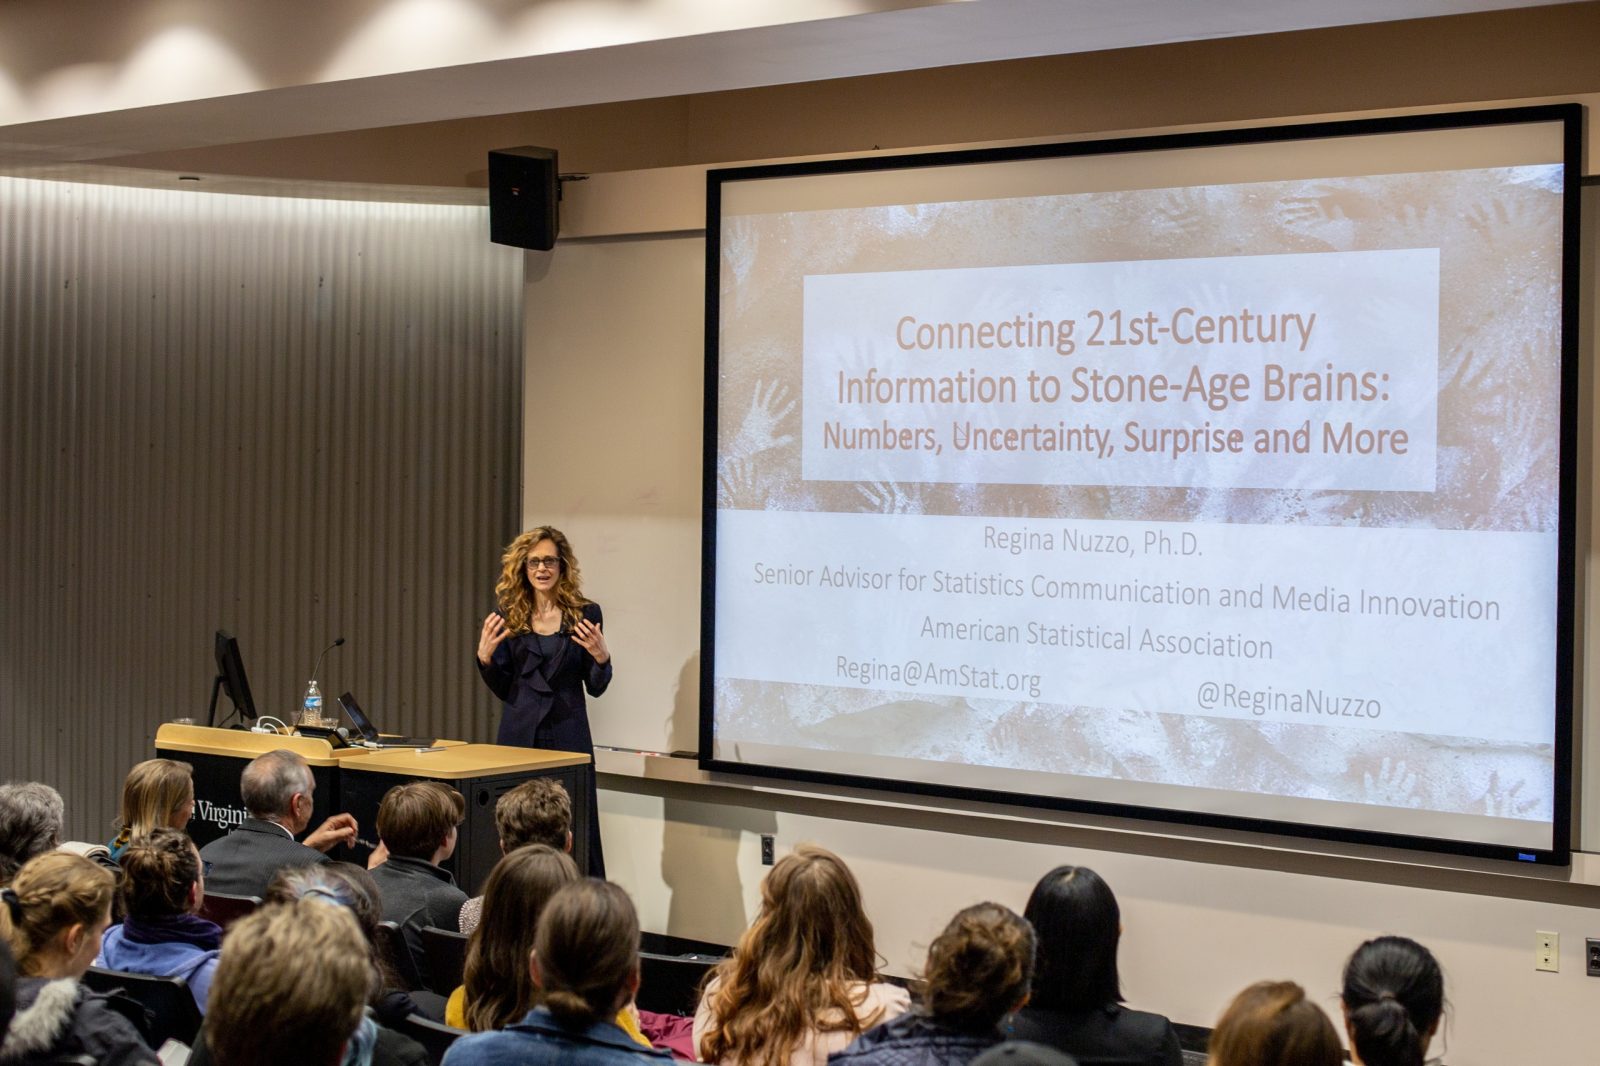 Regina Nuzzo kicked off the two-day event with an inspirational keynote address. A woman with large curly blonde hair is standing in front of a crowd, with a large projection screen behind her. Photo courtesy of Alex Freeze.